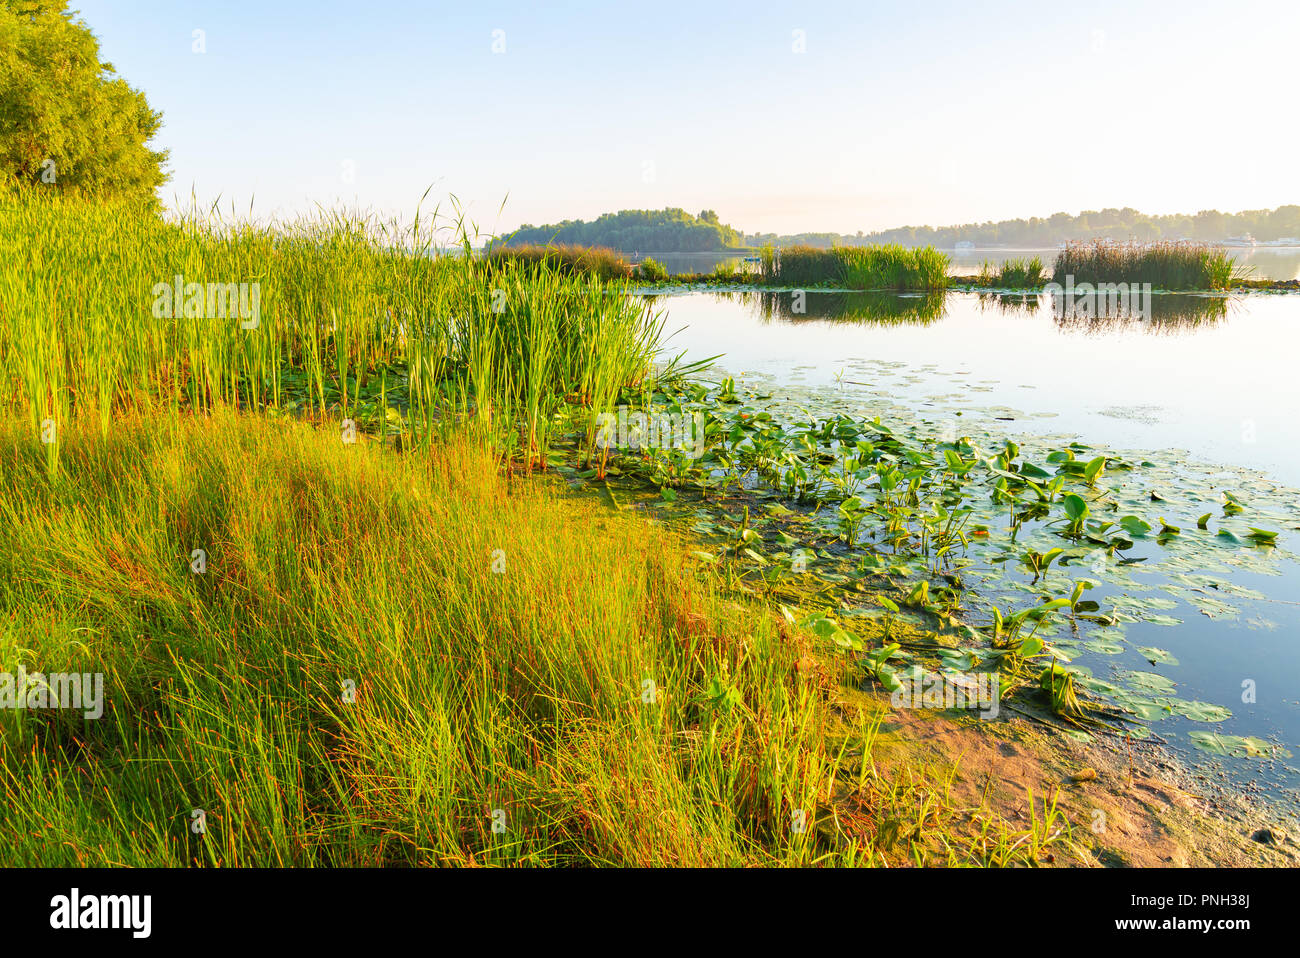 Scirpus plants and yellow waterlily in the Dnieper river in Kiev, Ukraine, at sunrise Stock Photo